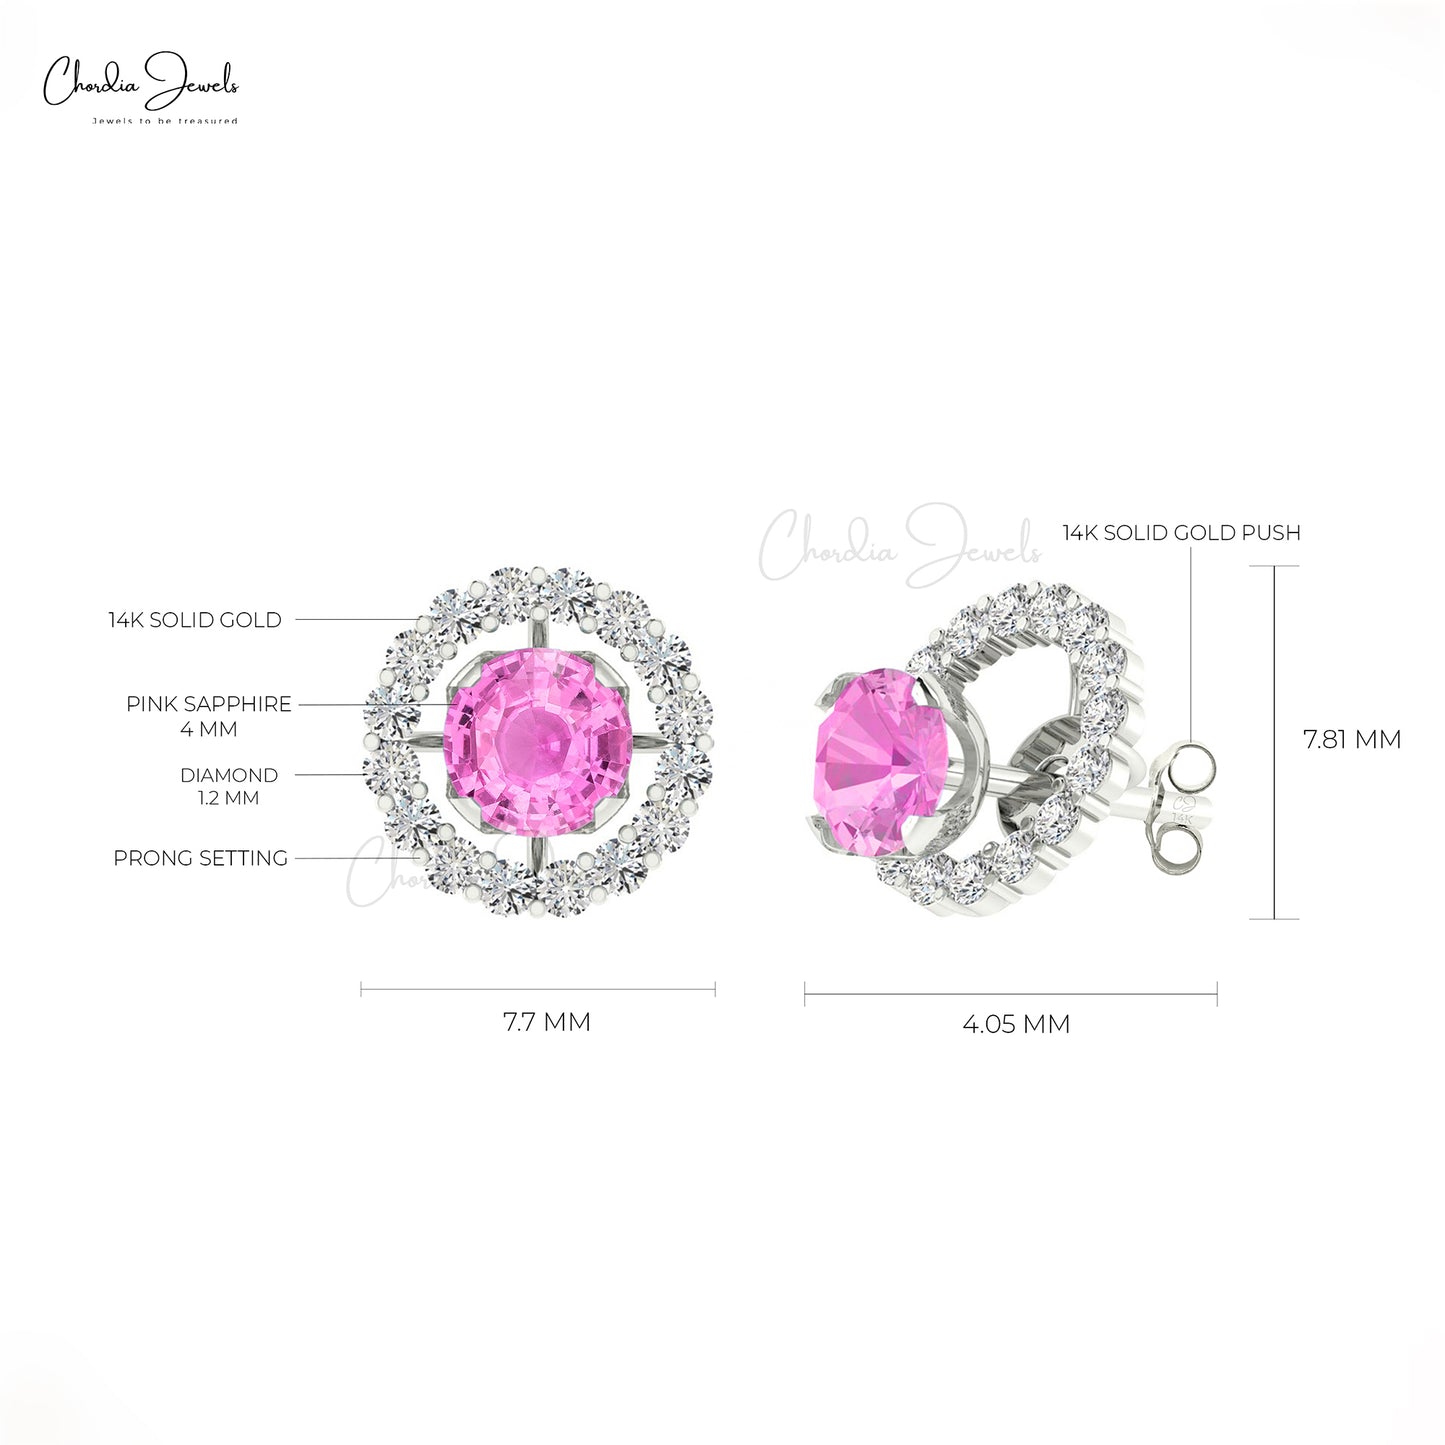 AAA Pink Sapphire Detachable Earrings 14k Real Gold Diamond Halo Studs 4mm Round Cut Natural Gemstone Light Weight Jewelry For Women's